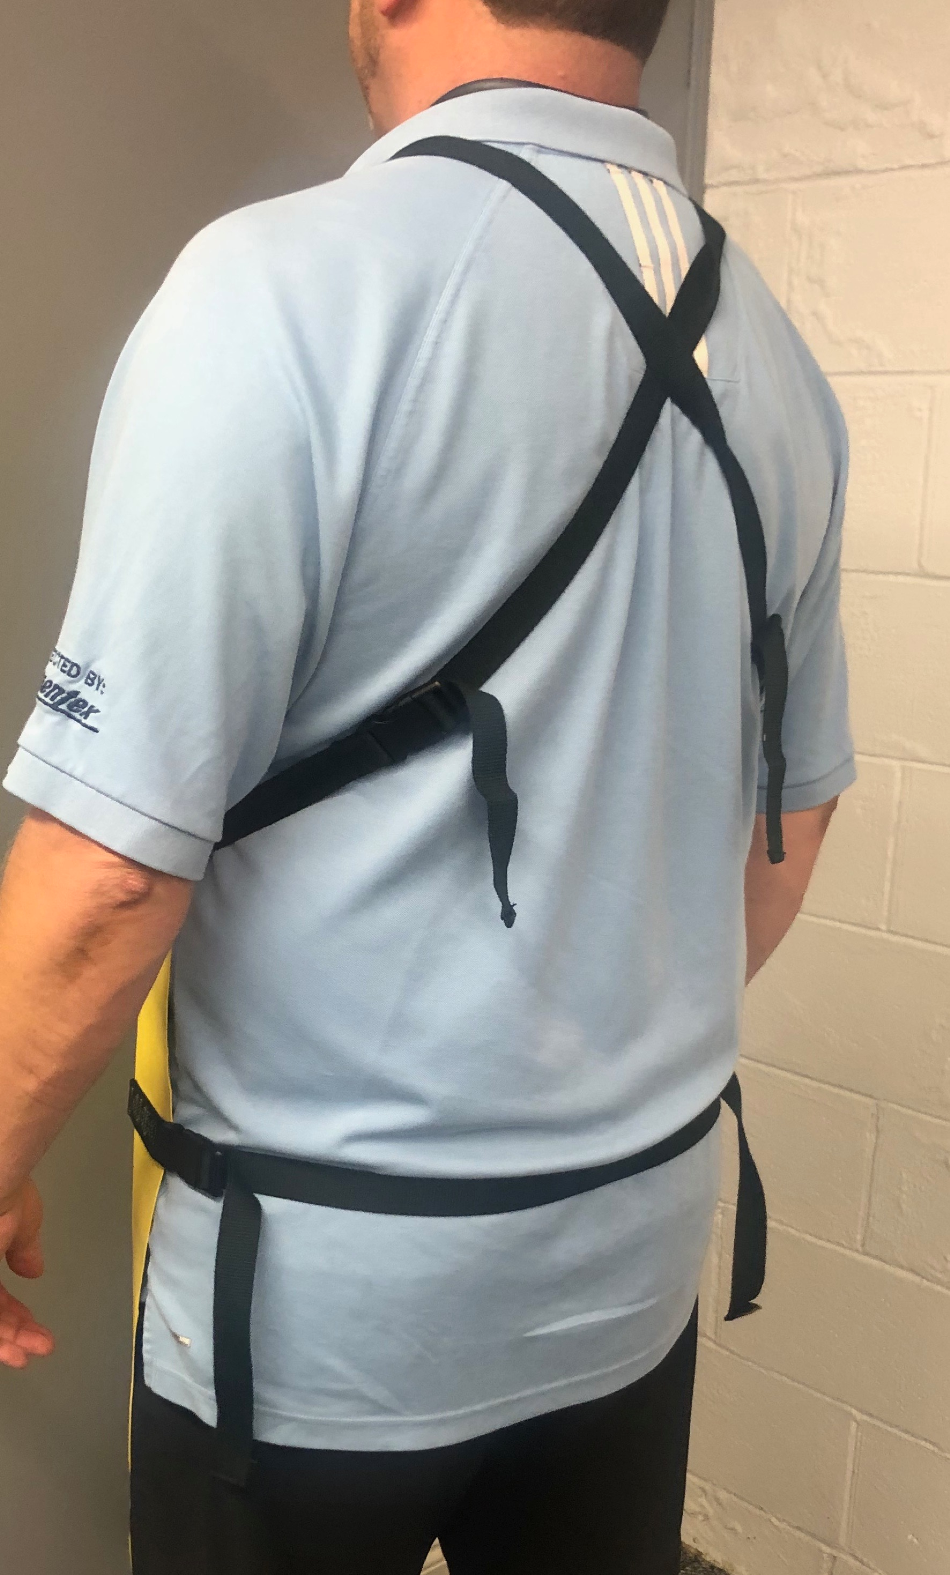 Cementex Announces Insulating Rubber Apron Now Available with New Belt Strap